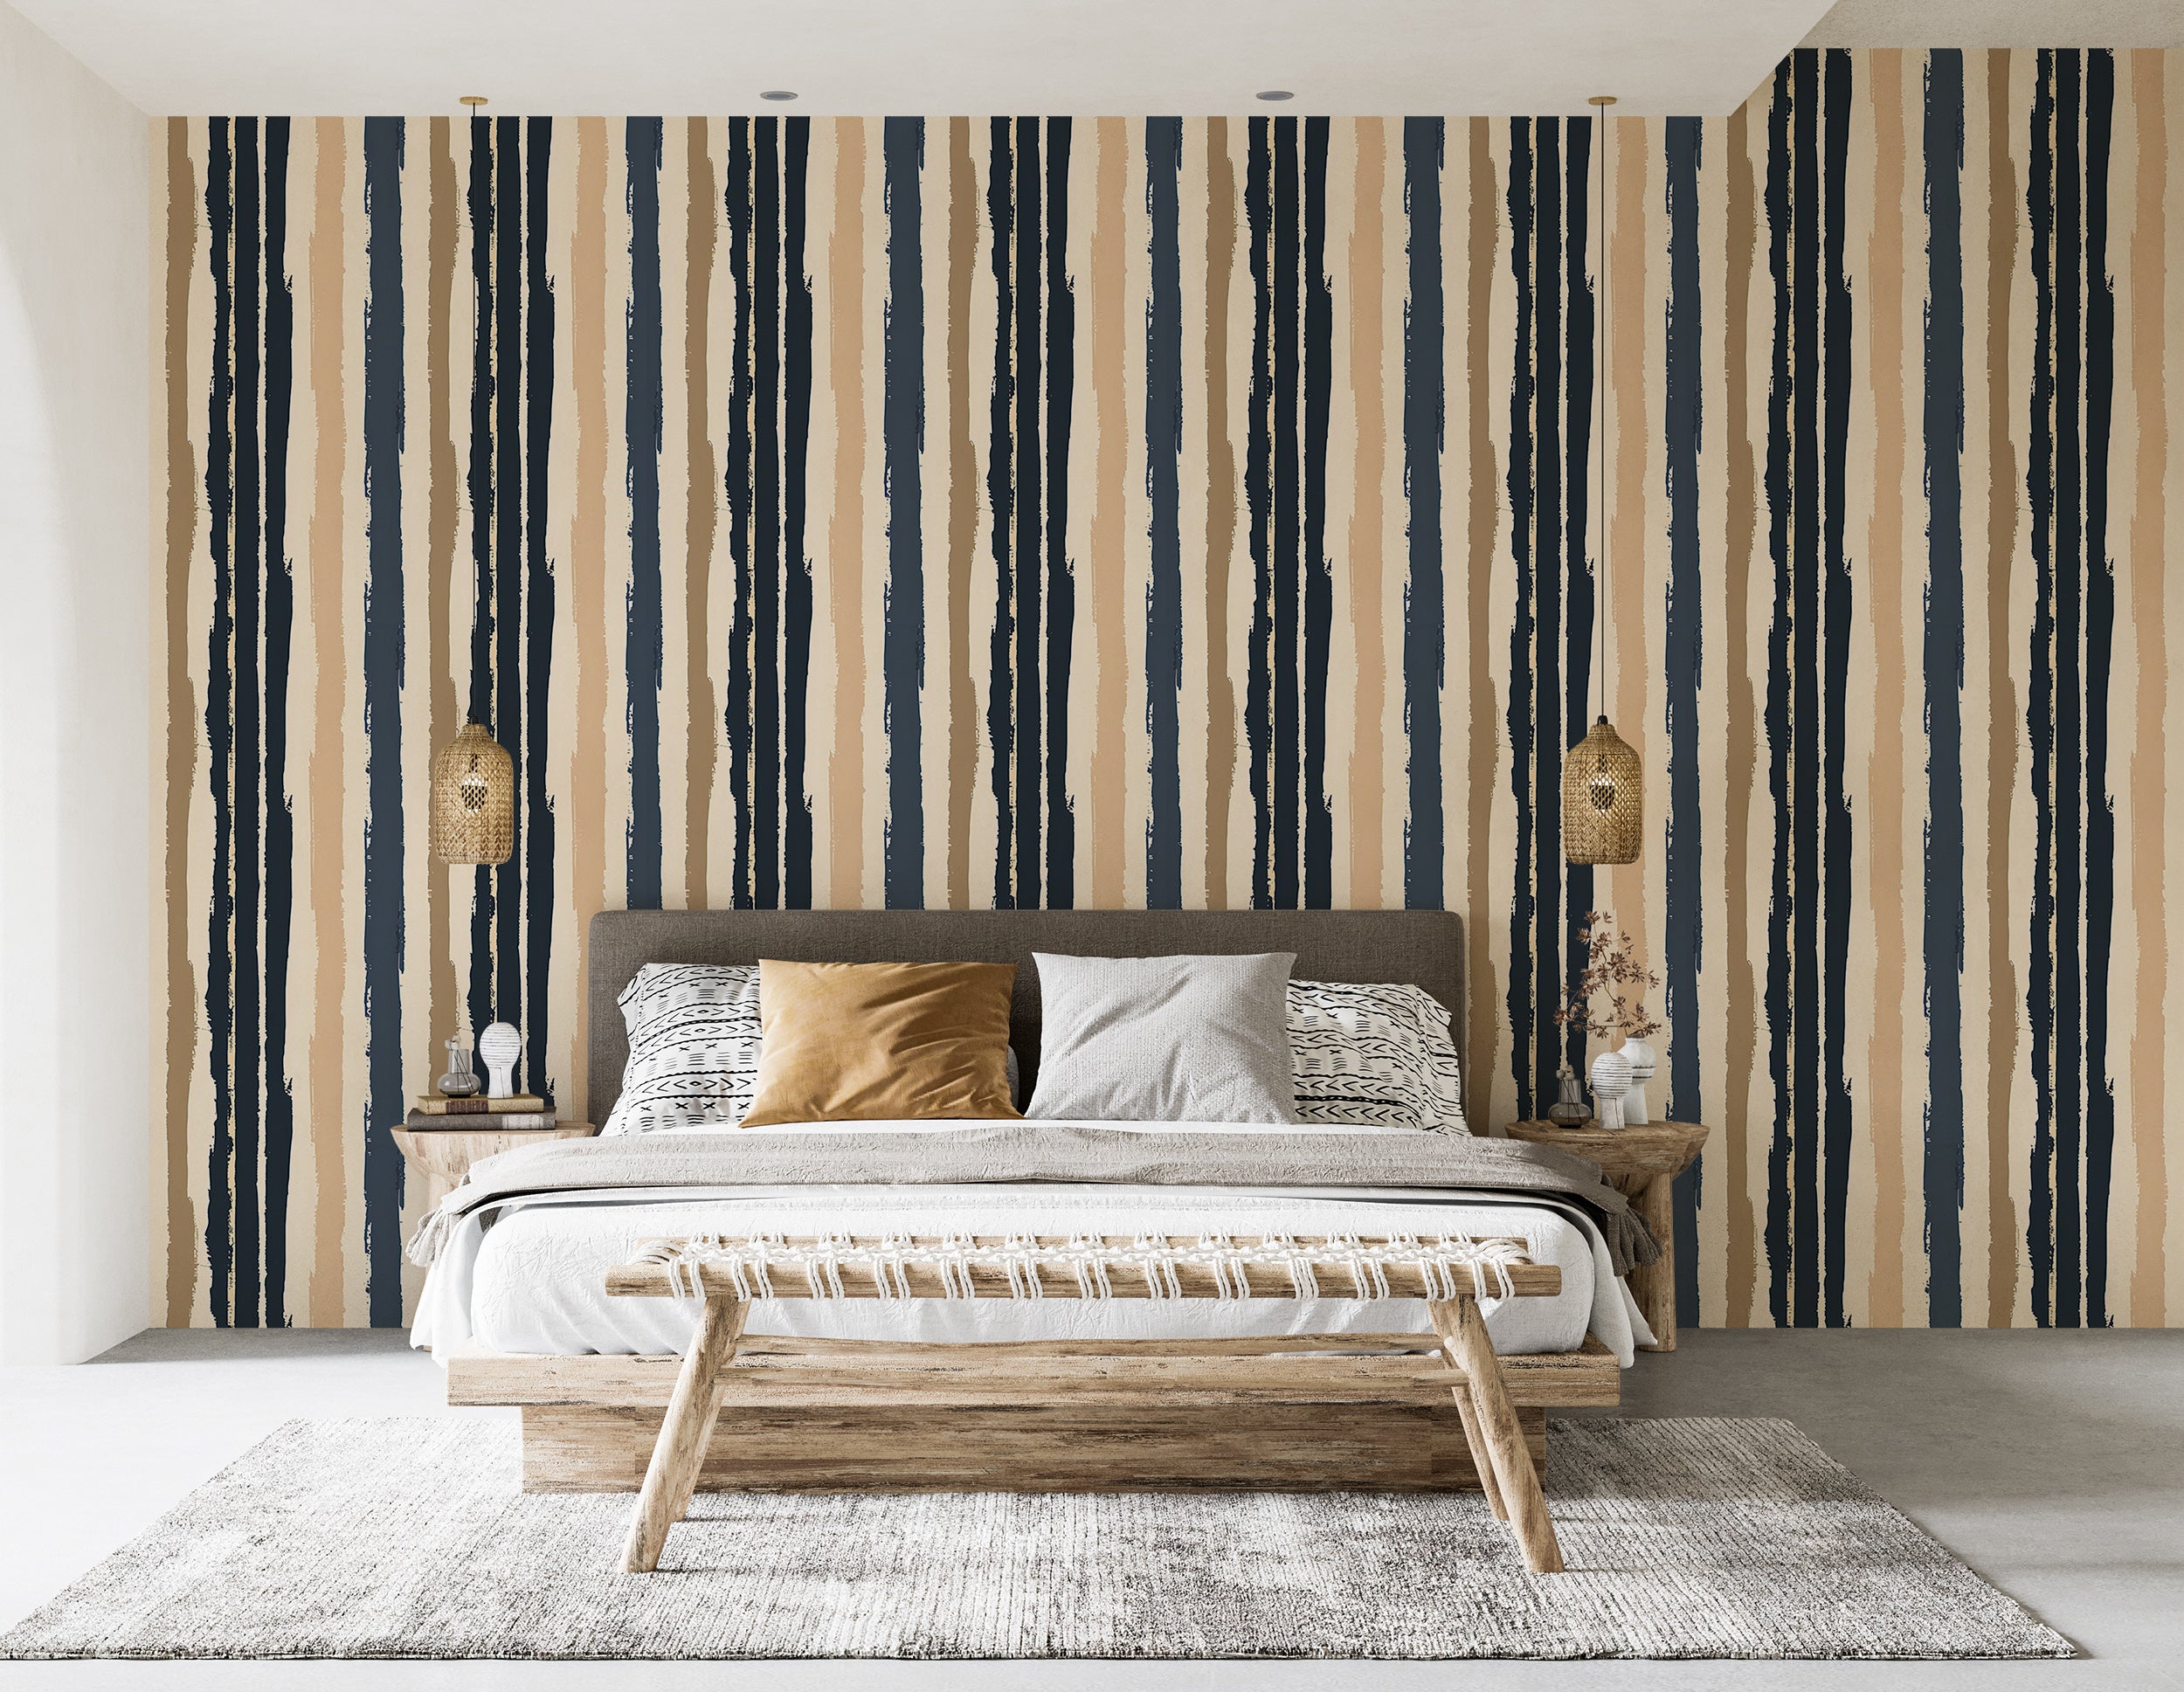 Peel and stick striped wall decor